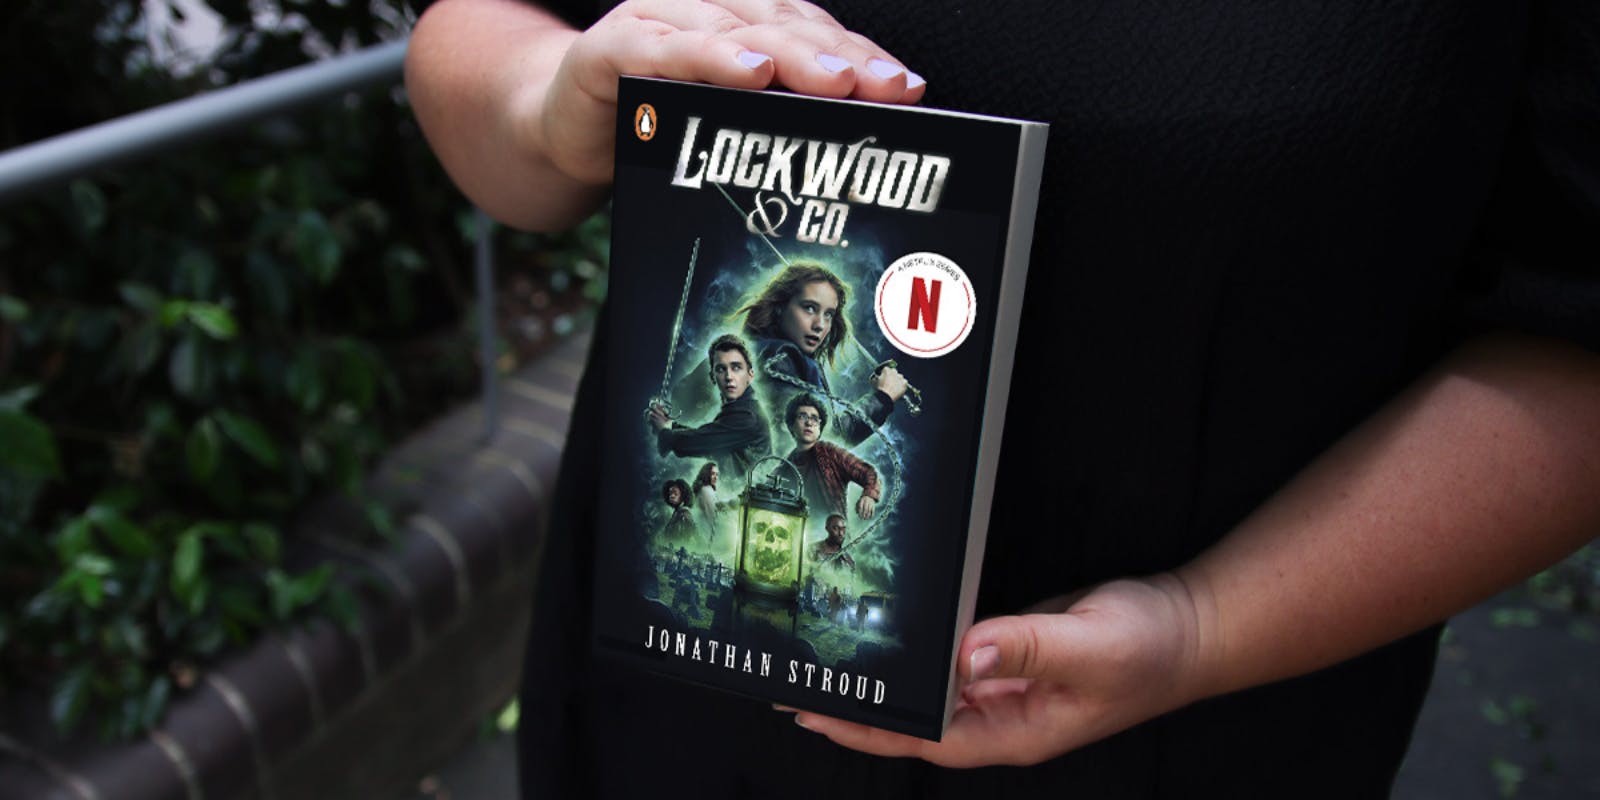 Everything you need to know before watching Lockwood & Co on Netflix